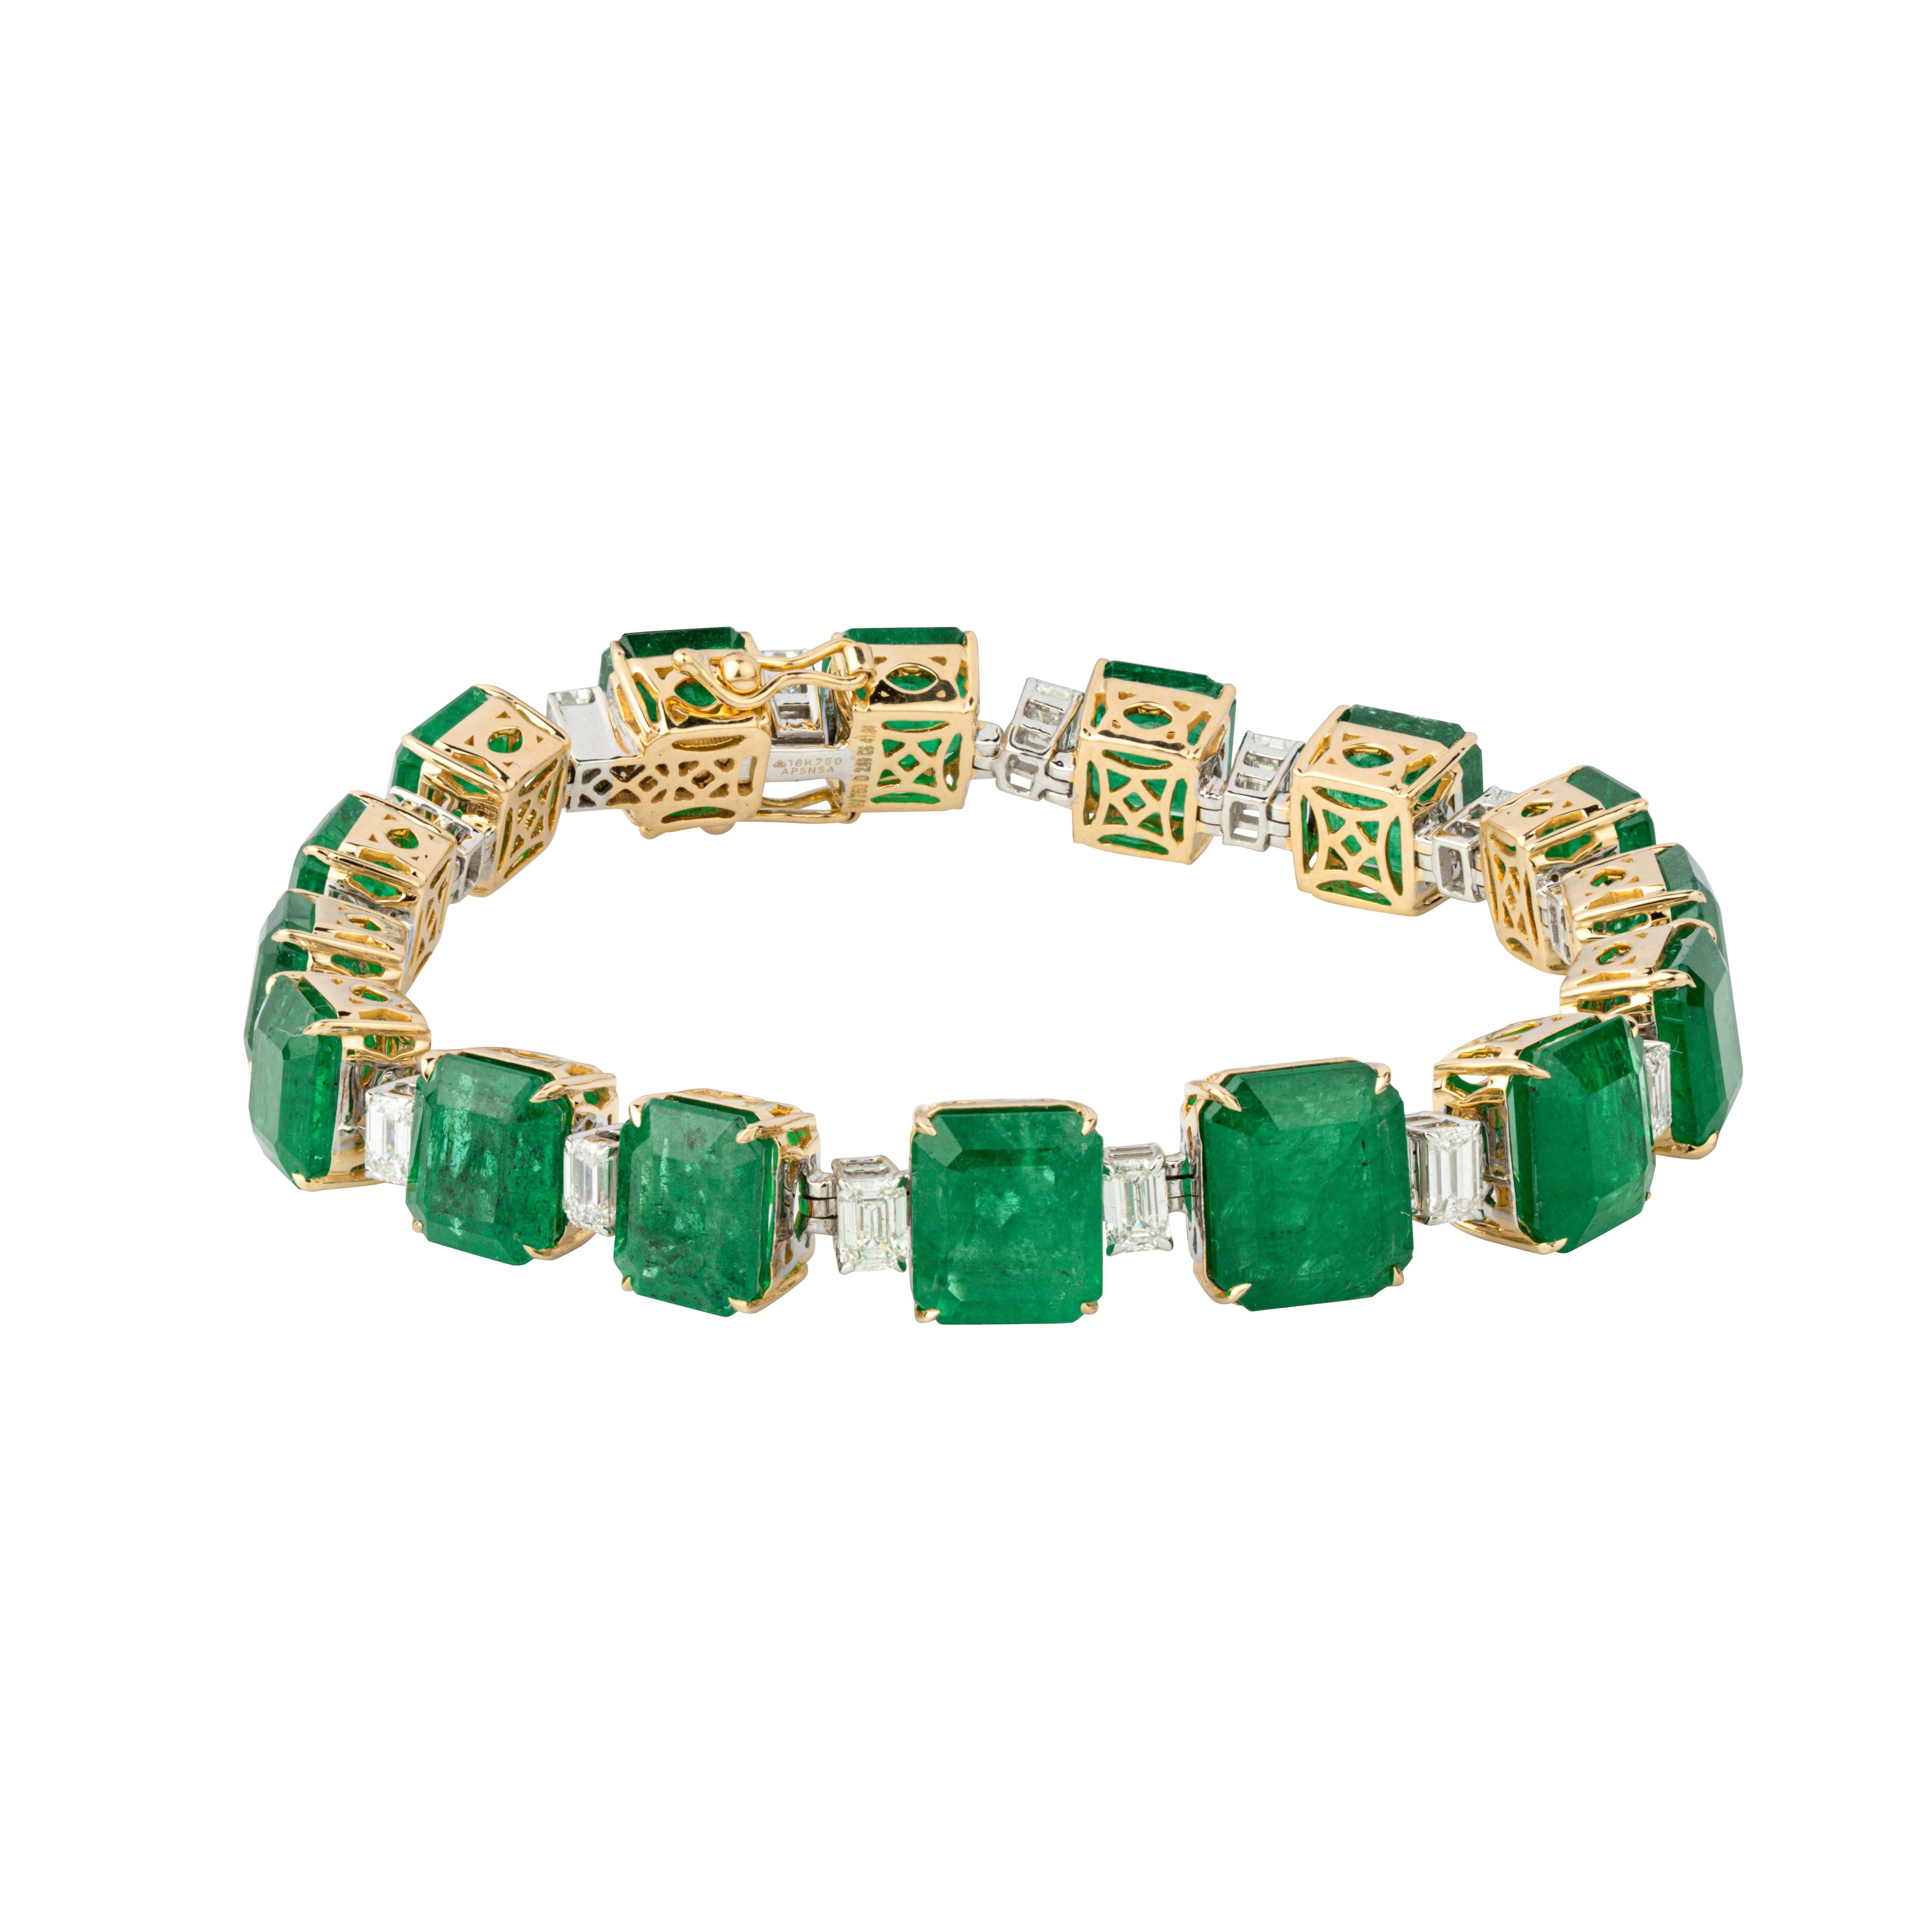 Diamonds : 2.99 carats
Emerald :  41.94 carats
Gold : 21.98   gms

It’s very hard to capture the true color and luster of the stone, I have tried to add pictures which are taken professionally and by me from my I phone to reflect the true image of